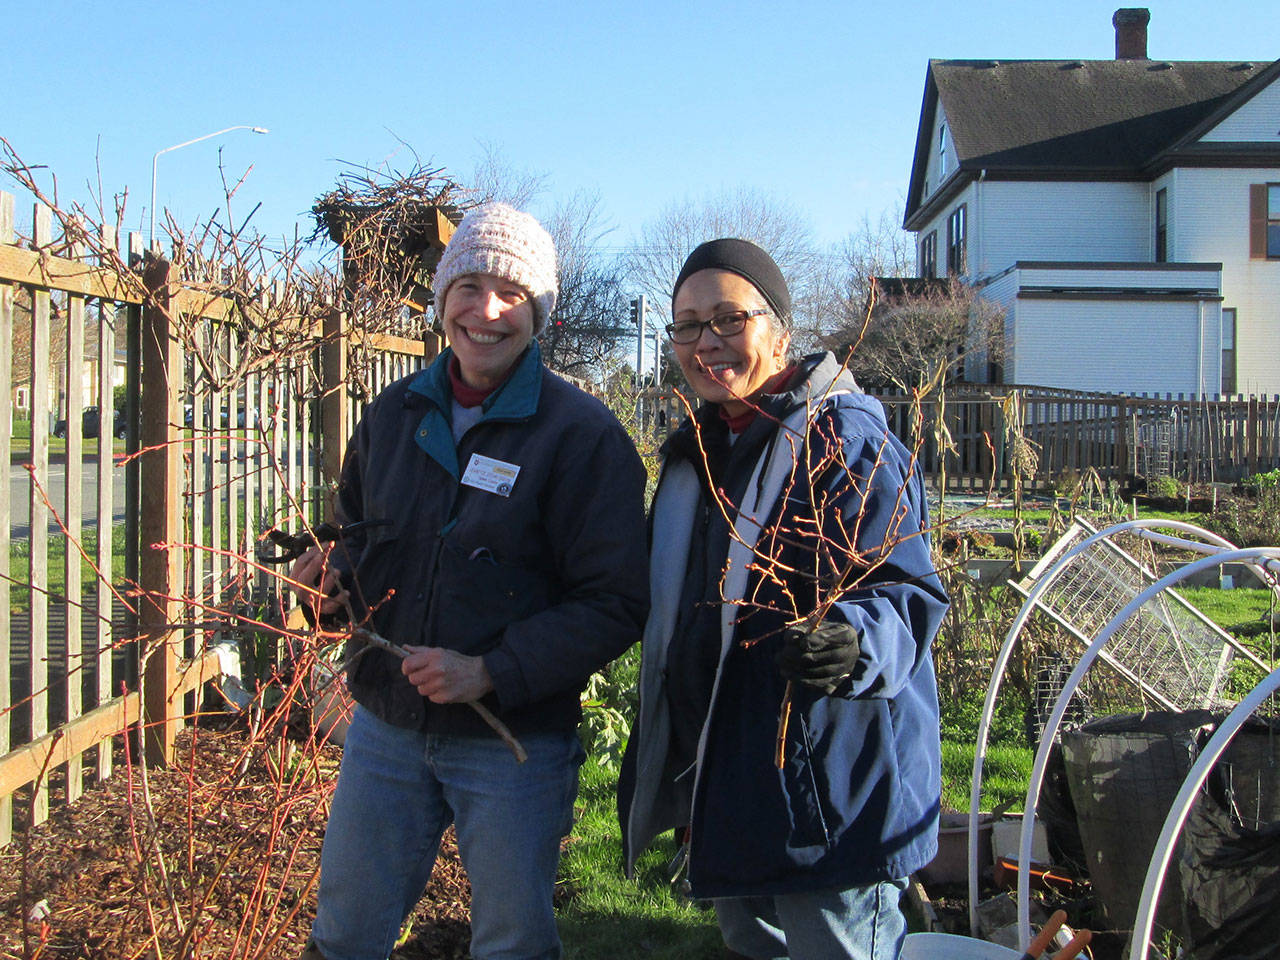 Clallam County Master Gardeners Jeanette Stehr-Green, left, and Audreen Williams will discuss blueberry pruning live via Zoom on Saturday, Feb. 13. Submitted photo